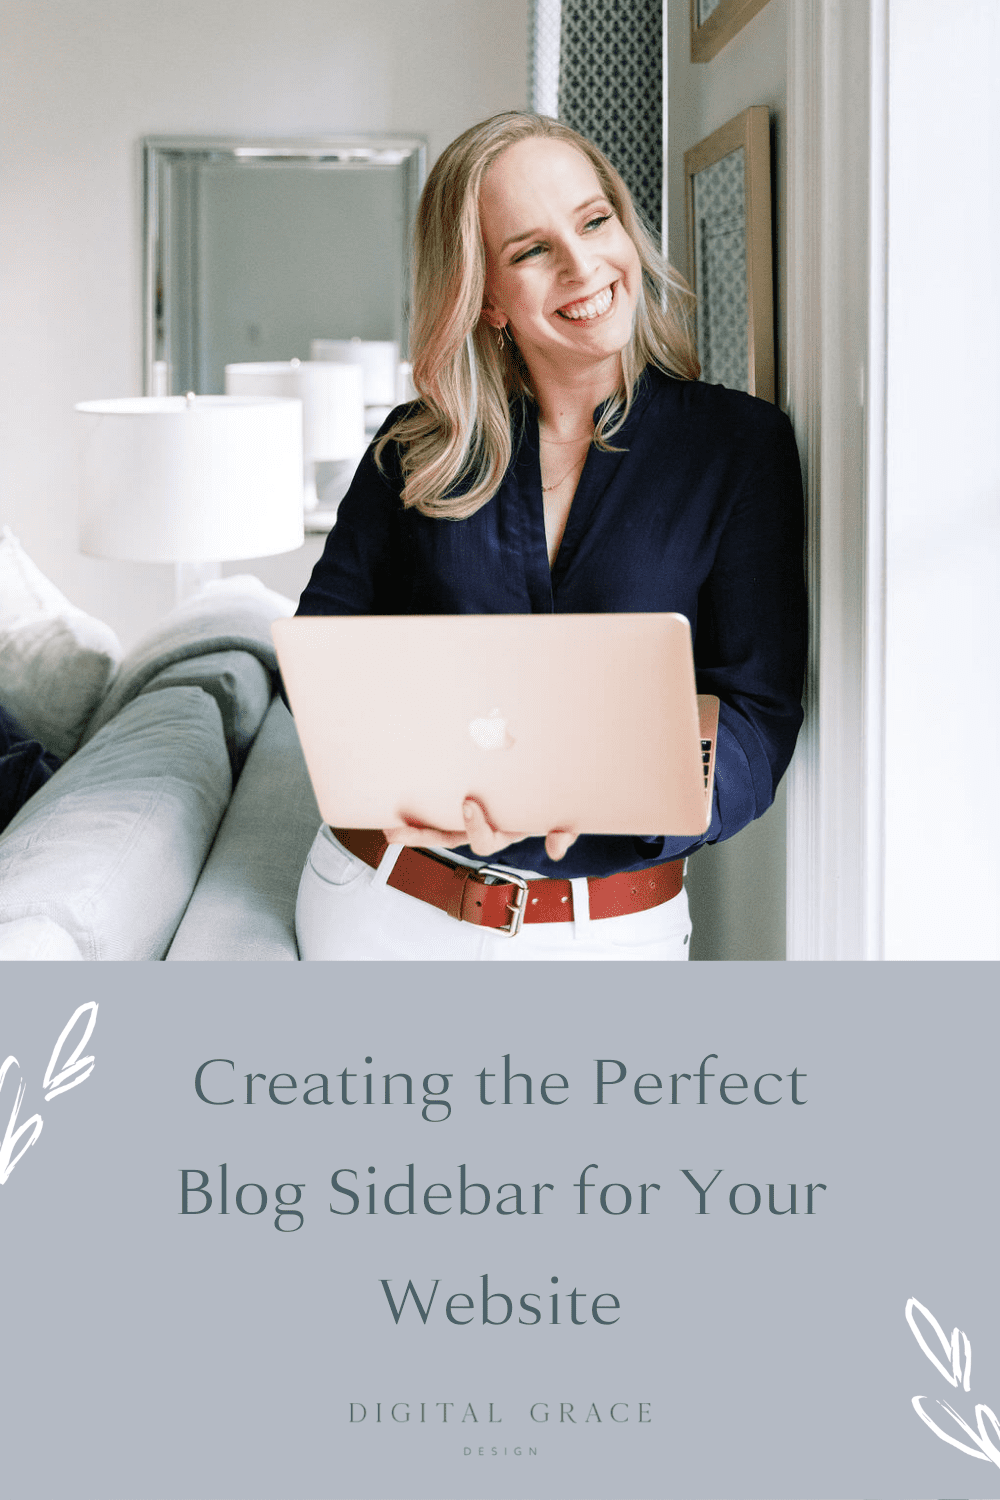 Creating the Perfect Blog Sidebar for Your Website